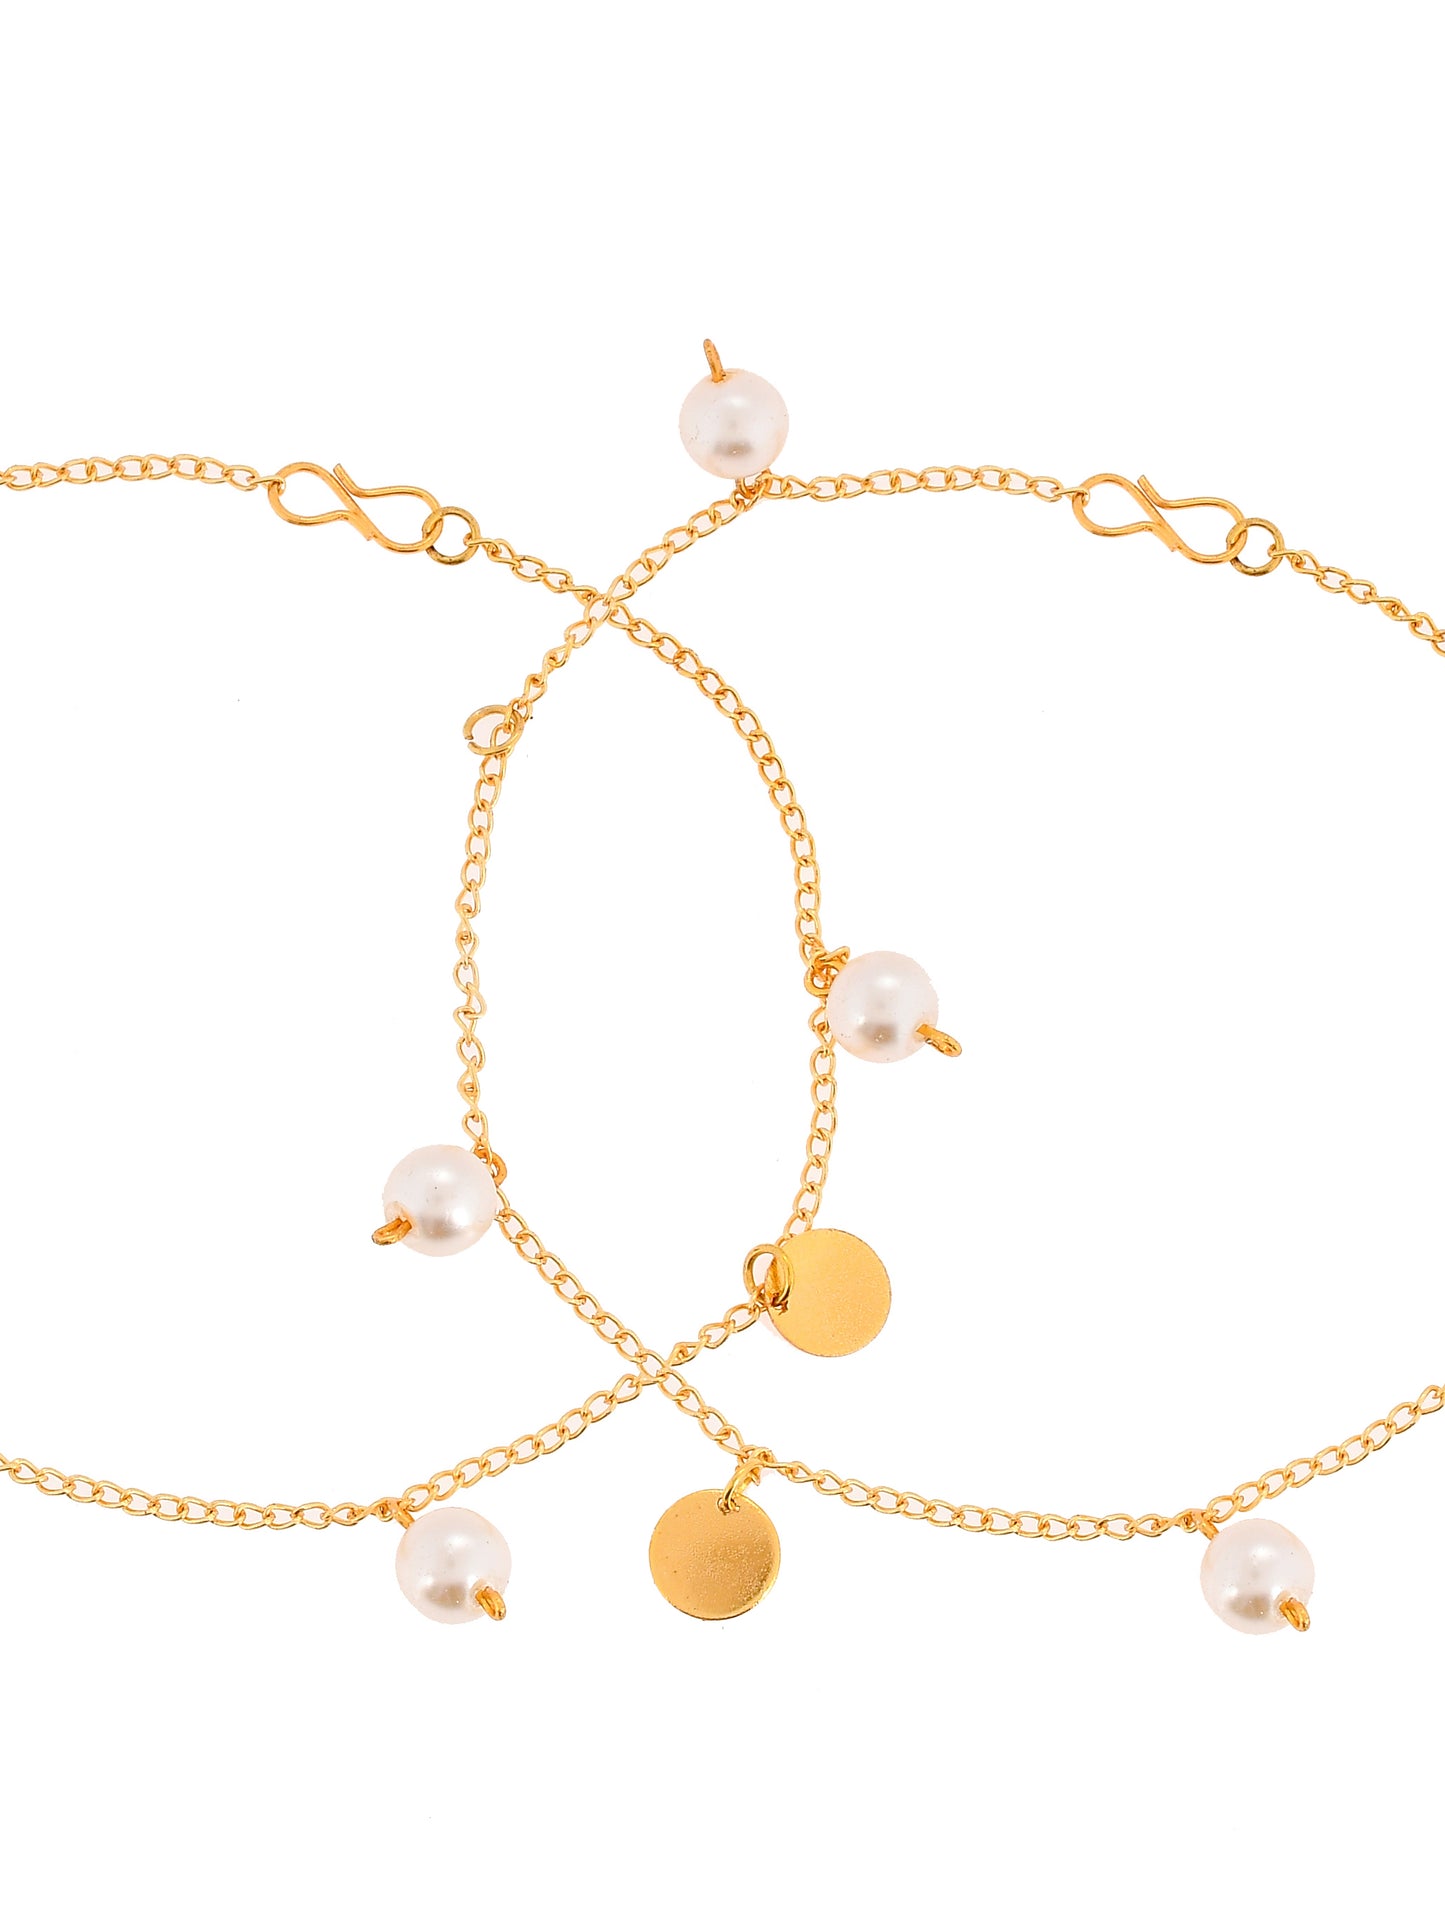 Gold Anklet with Dangling Pearls and Charms